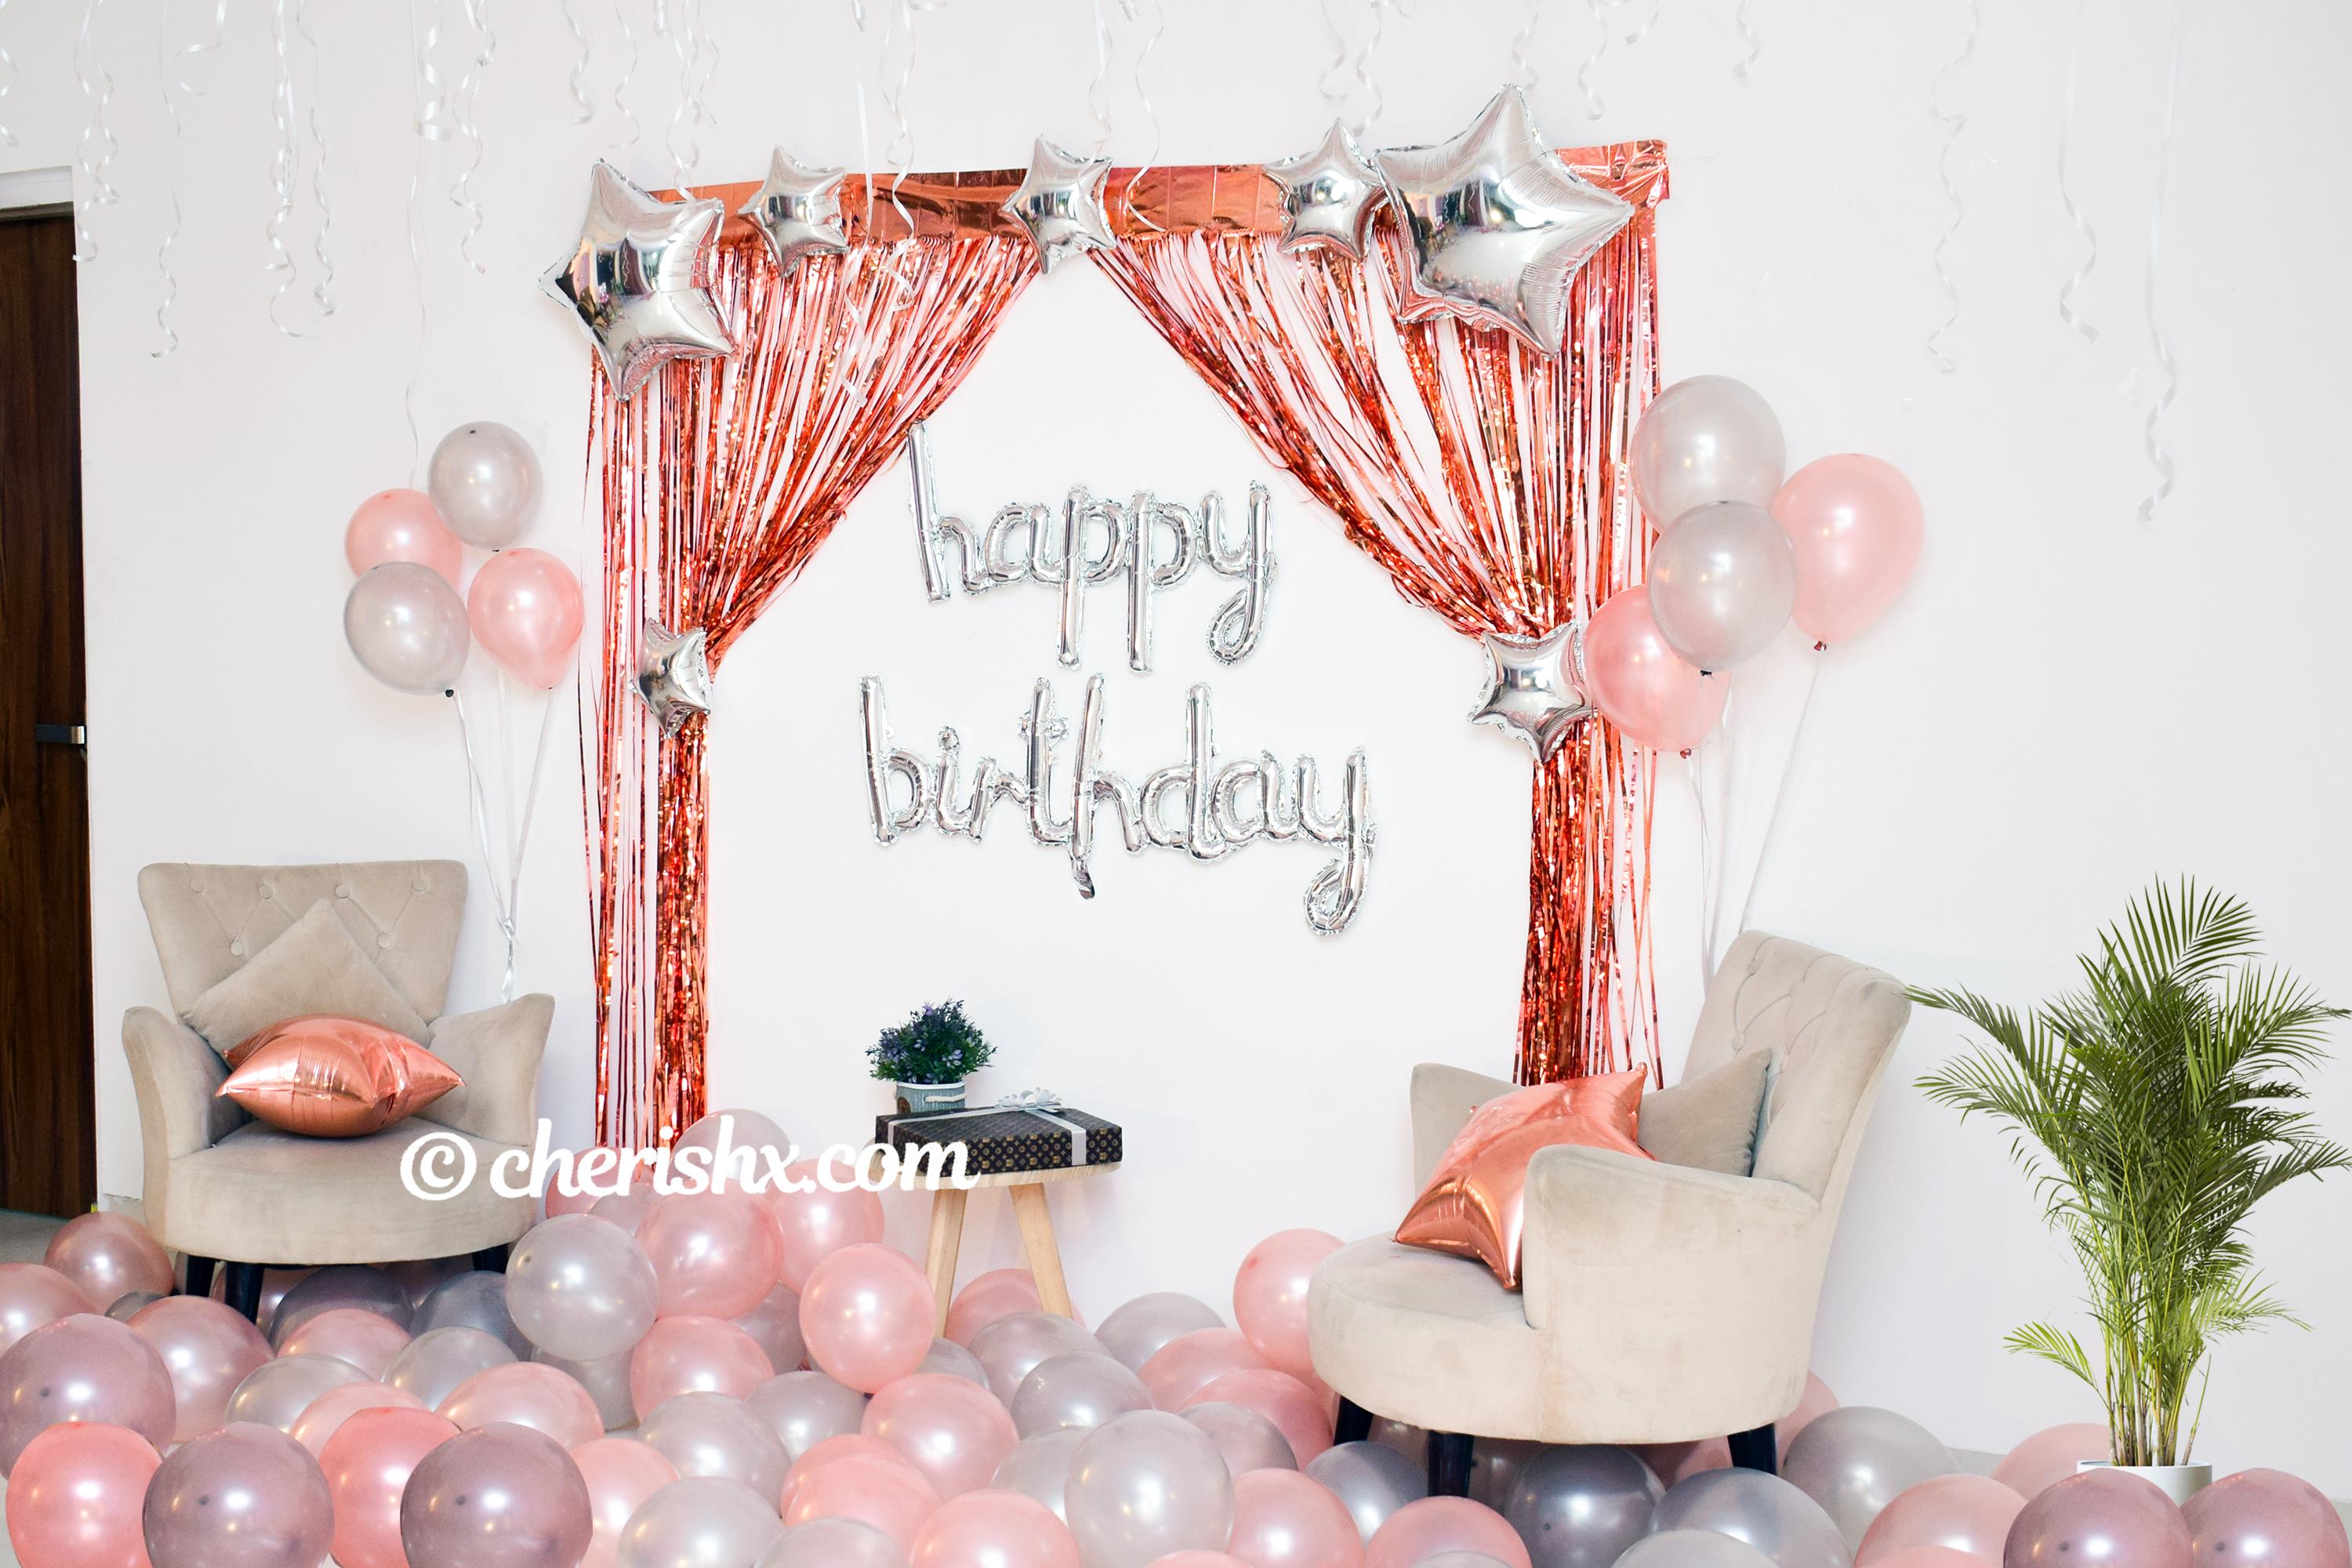 CherishX's Happy Birthday Rose Gold Surprise Decor with rosegold and metallic balloons.